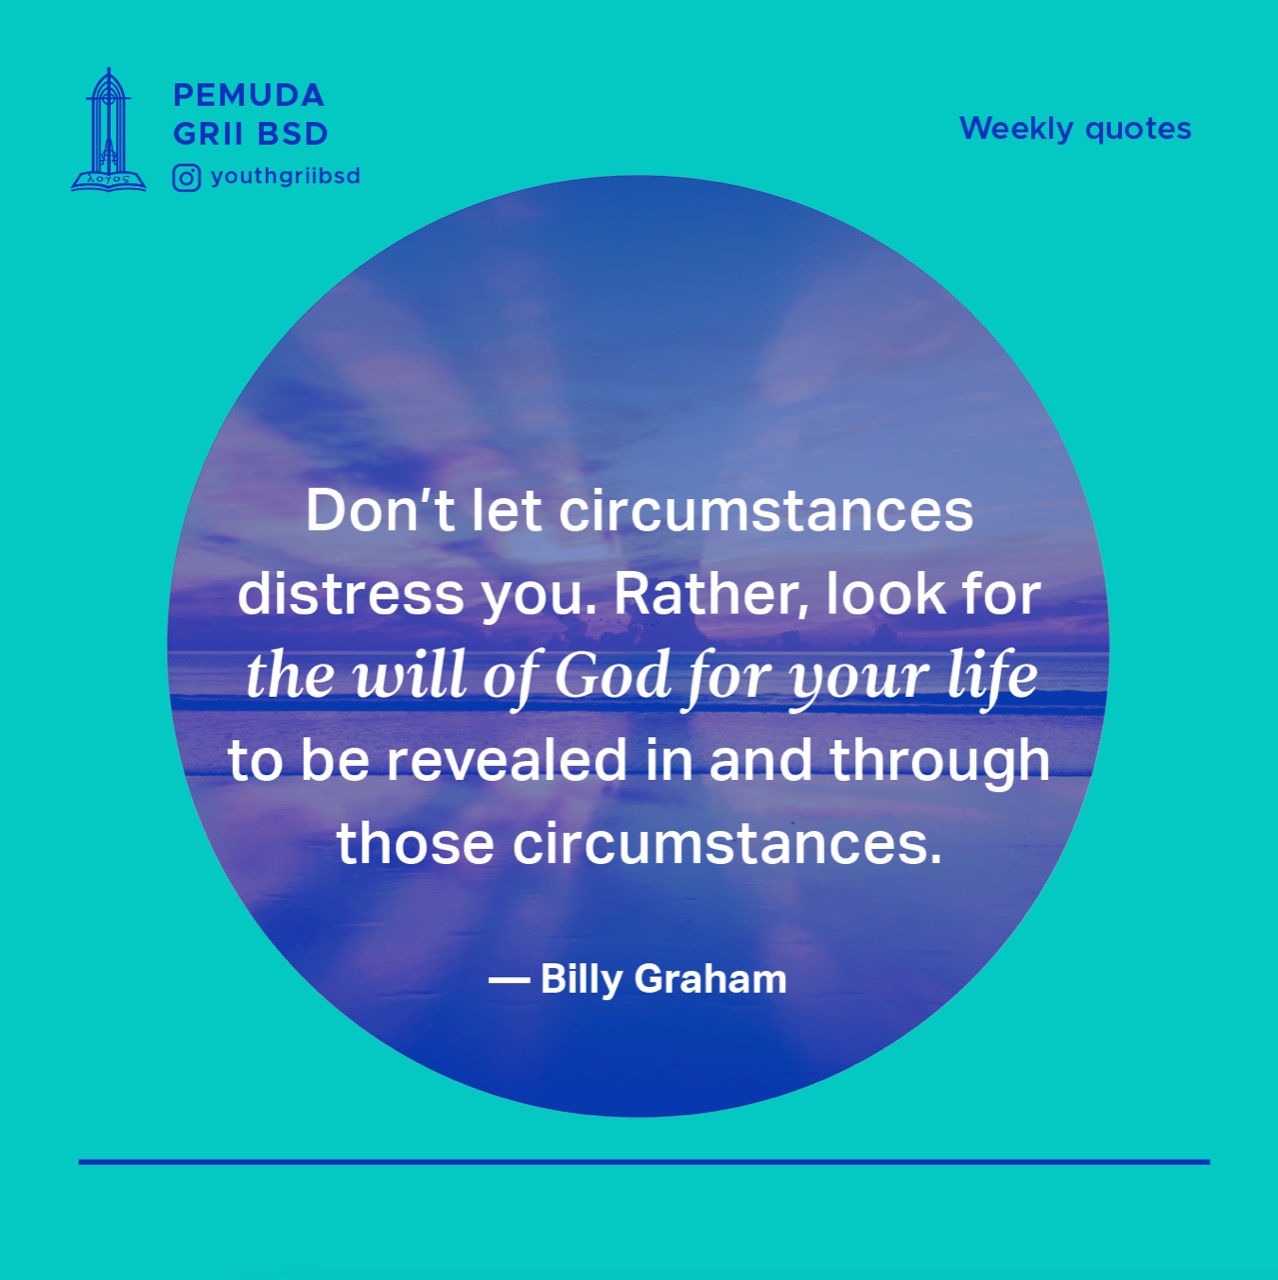 Don't let circumstances distress you. Rather, look for the will of God for your life to be revealed in and through those circumstances.